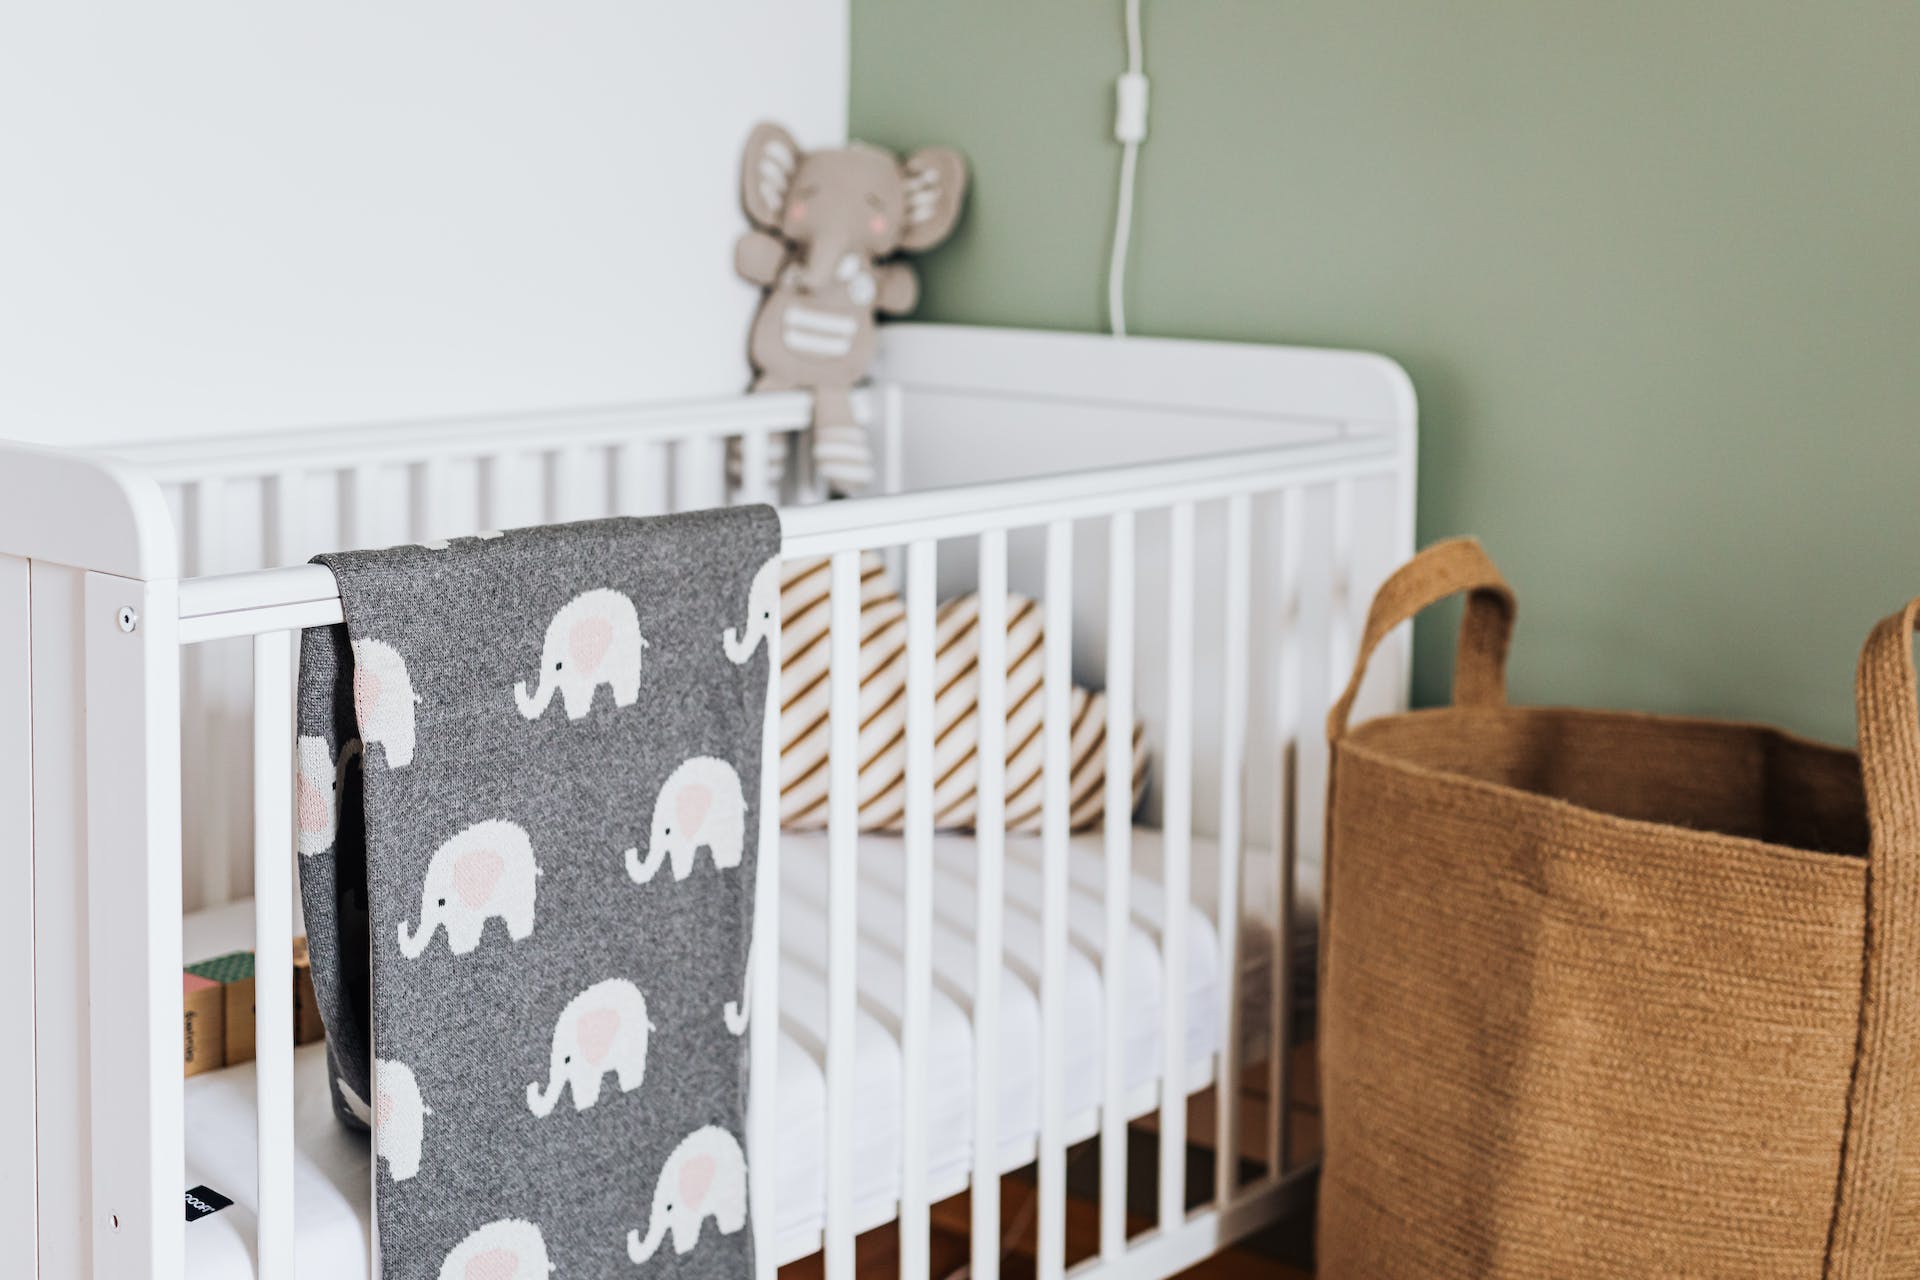 White crib with elephant blanket and toy | Source: Pexels